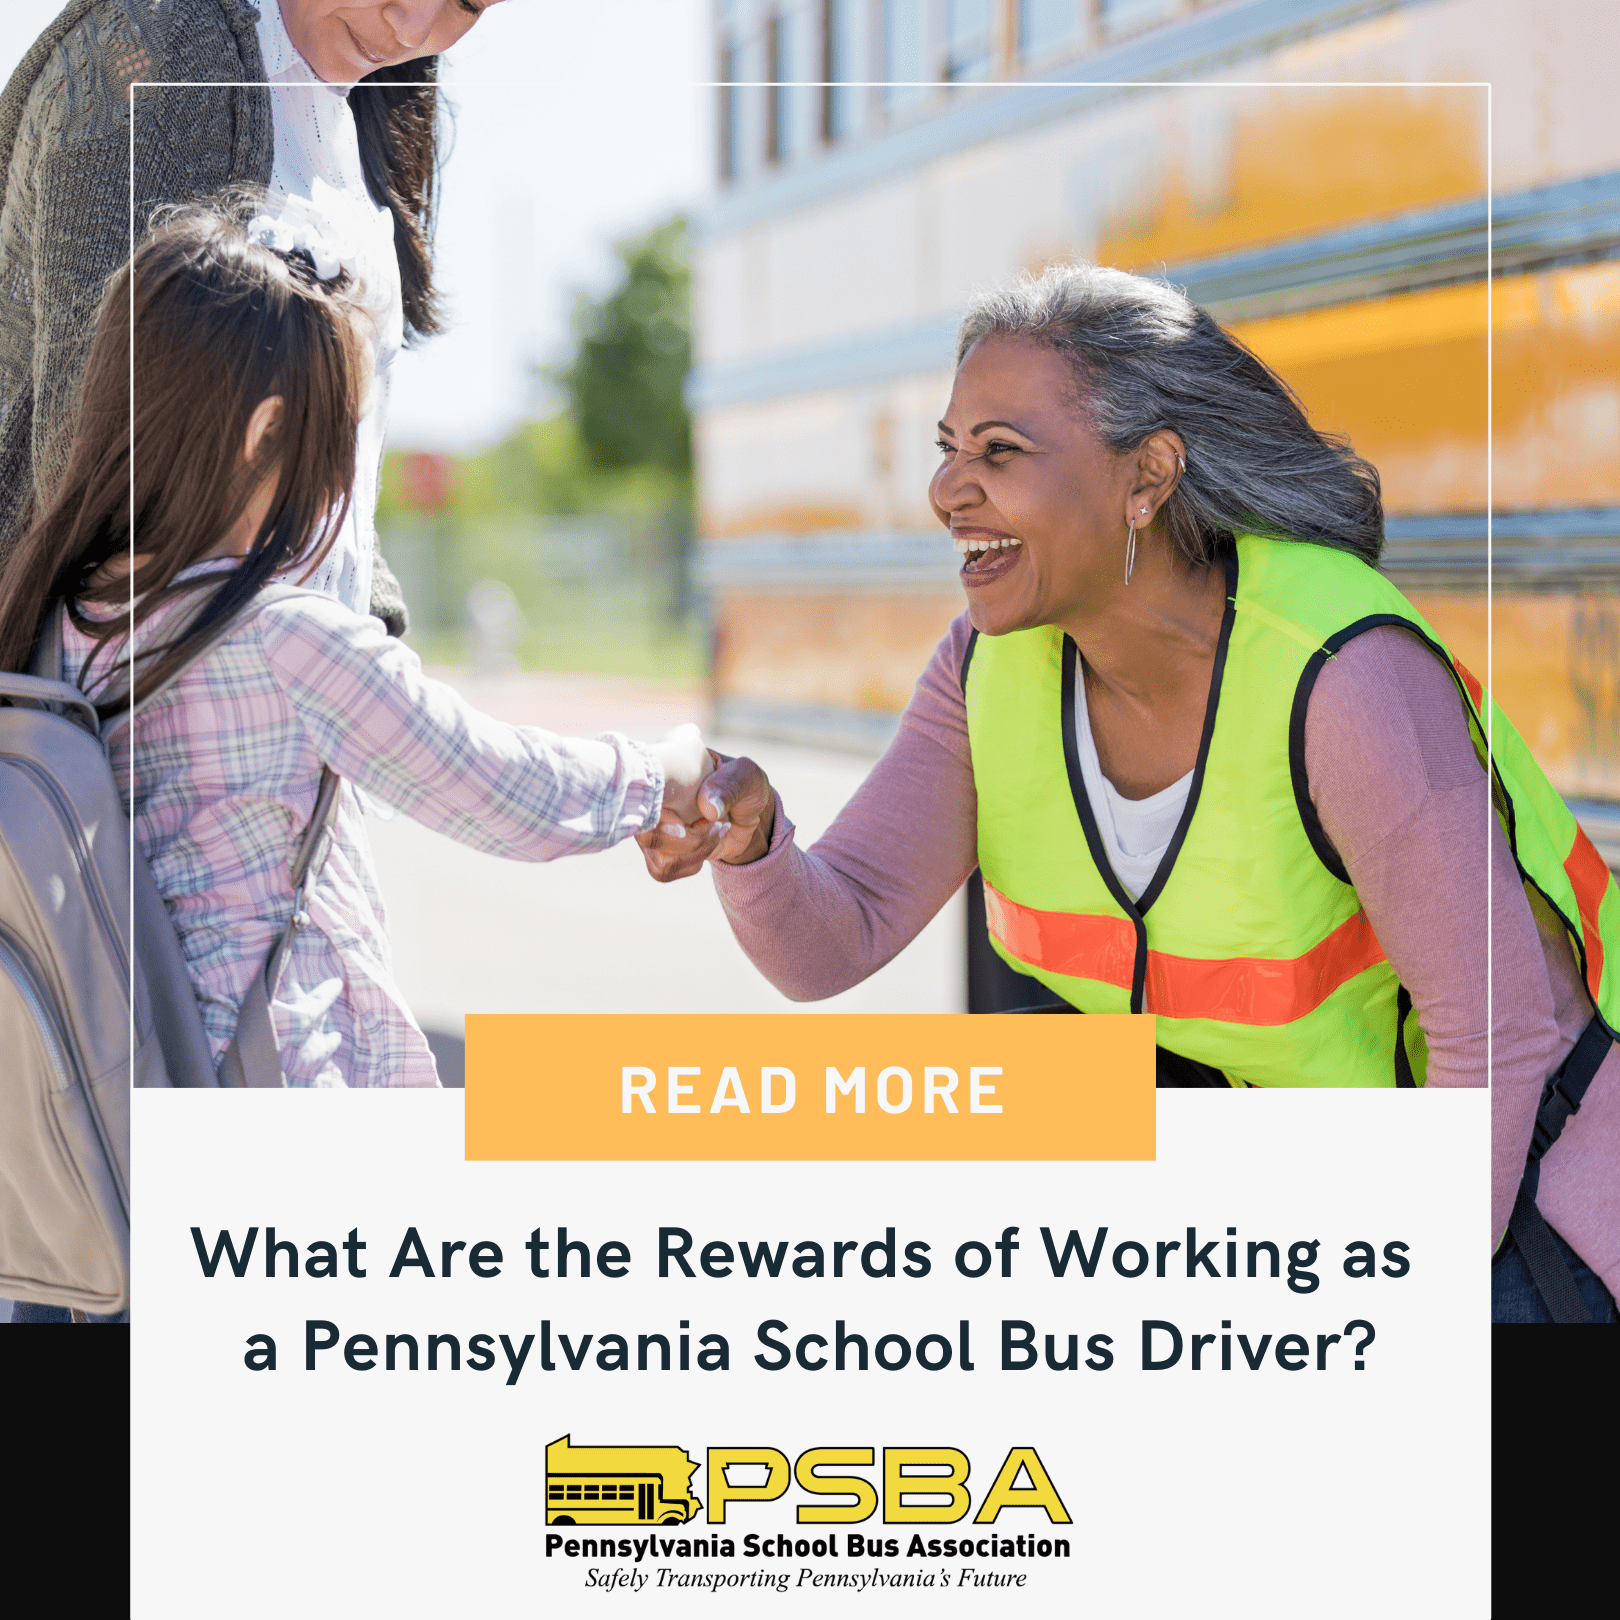 What Are the Rewards of Working as a Pennsylvania School Bus Driver?